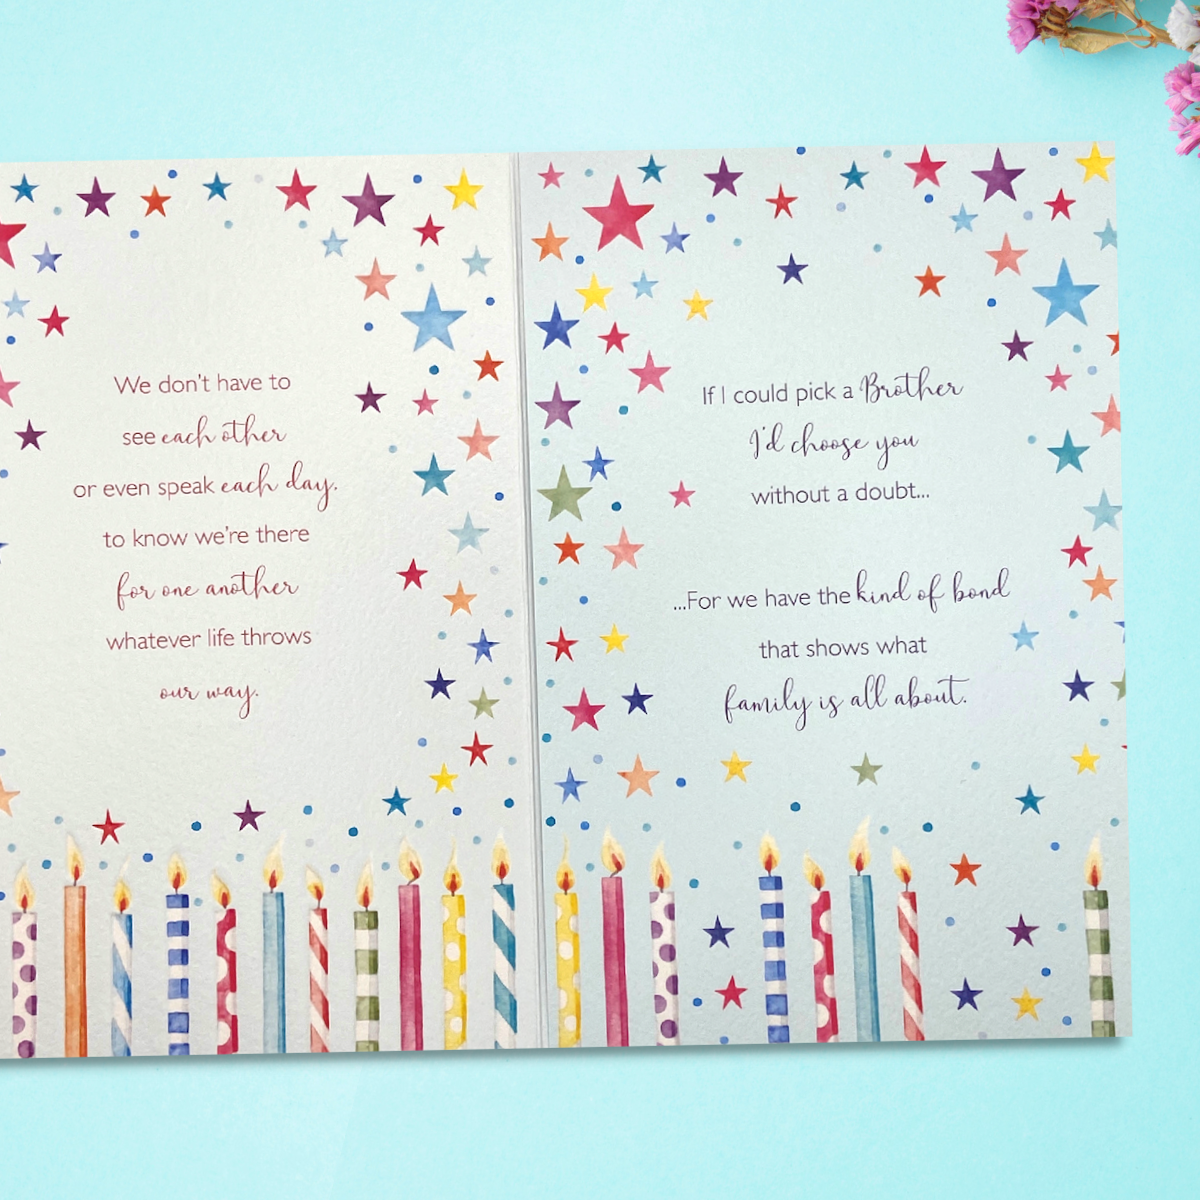 Inside image showing two pages with further candles, stars and verse